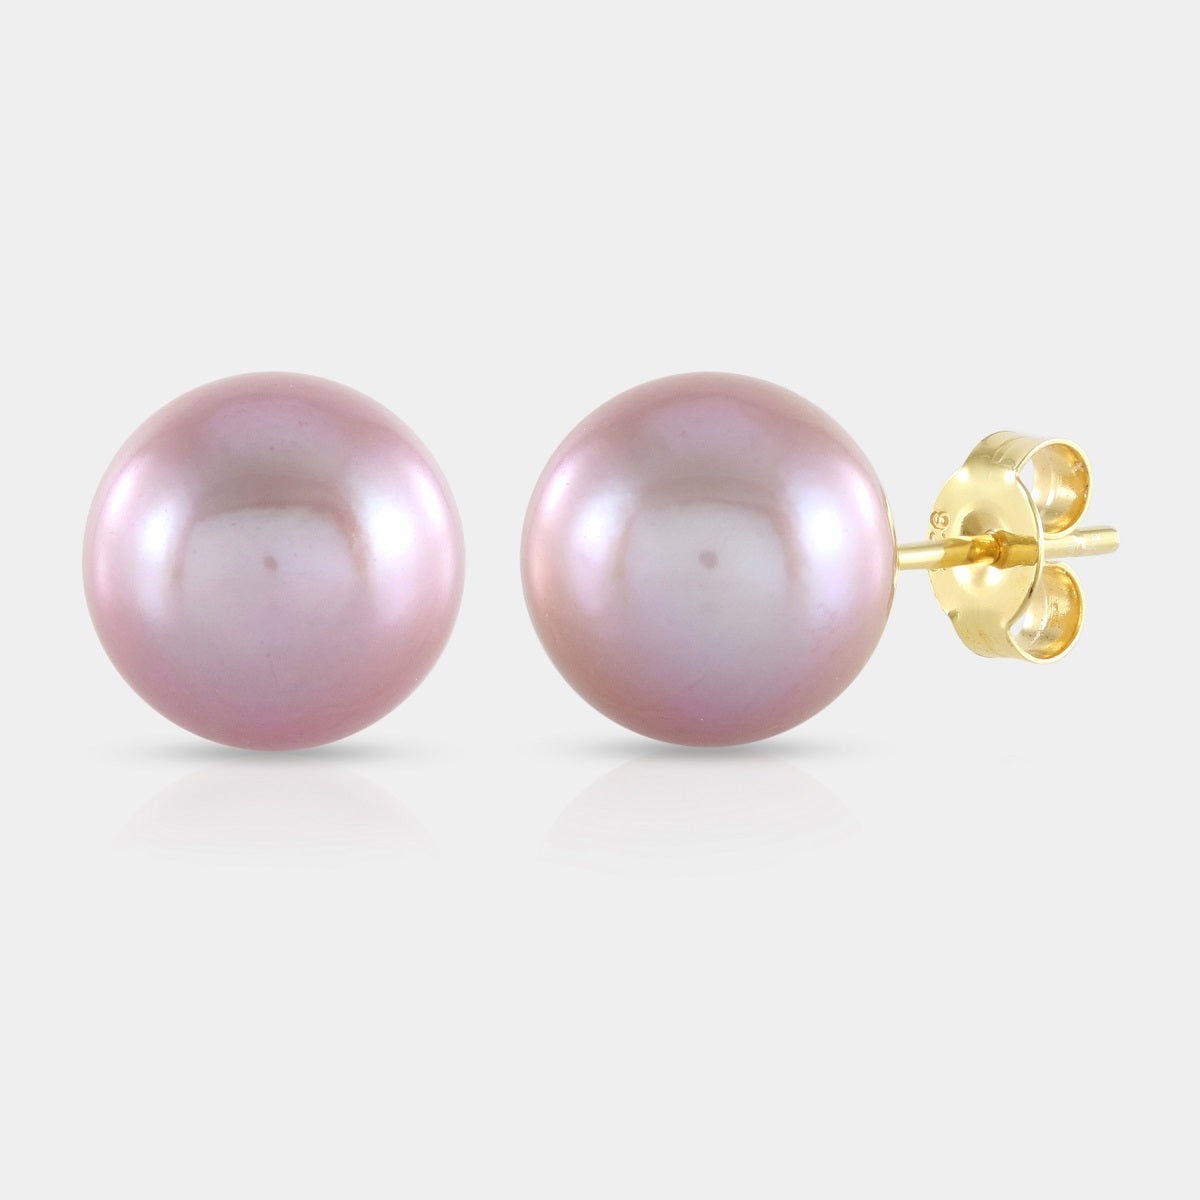 Close-Up of Pink Pearl Earrings with Gold Accents